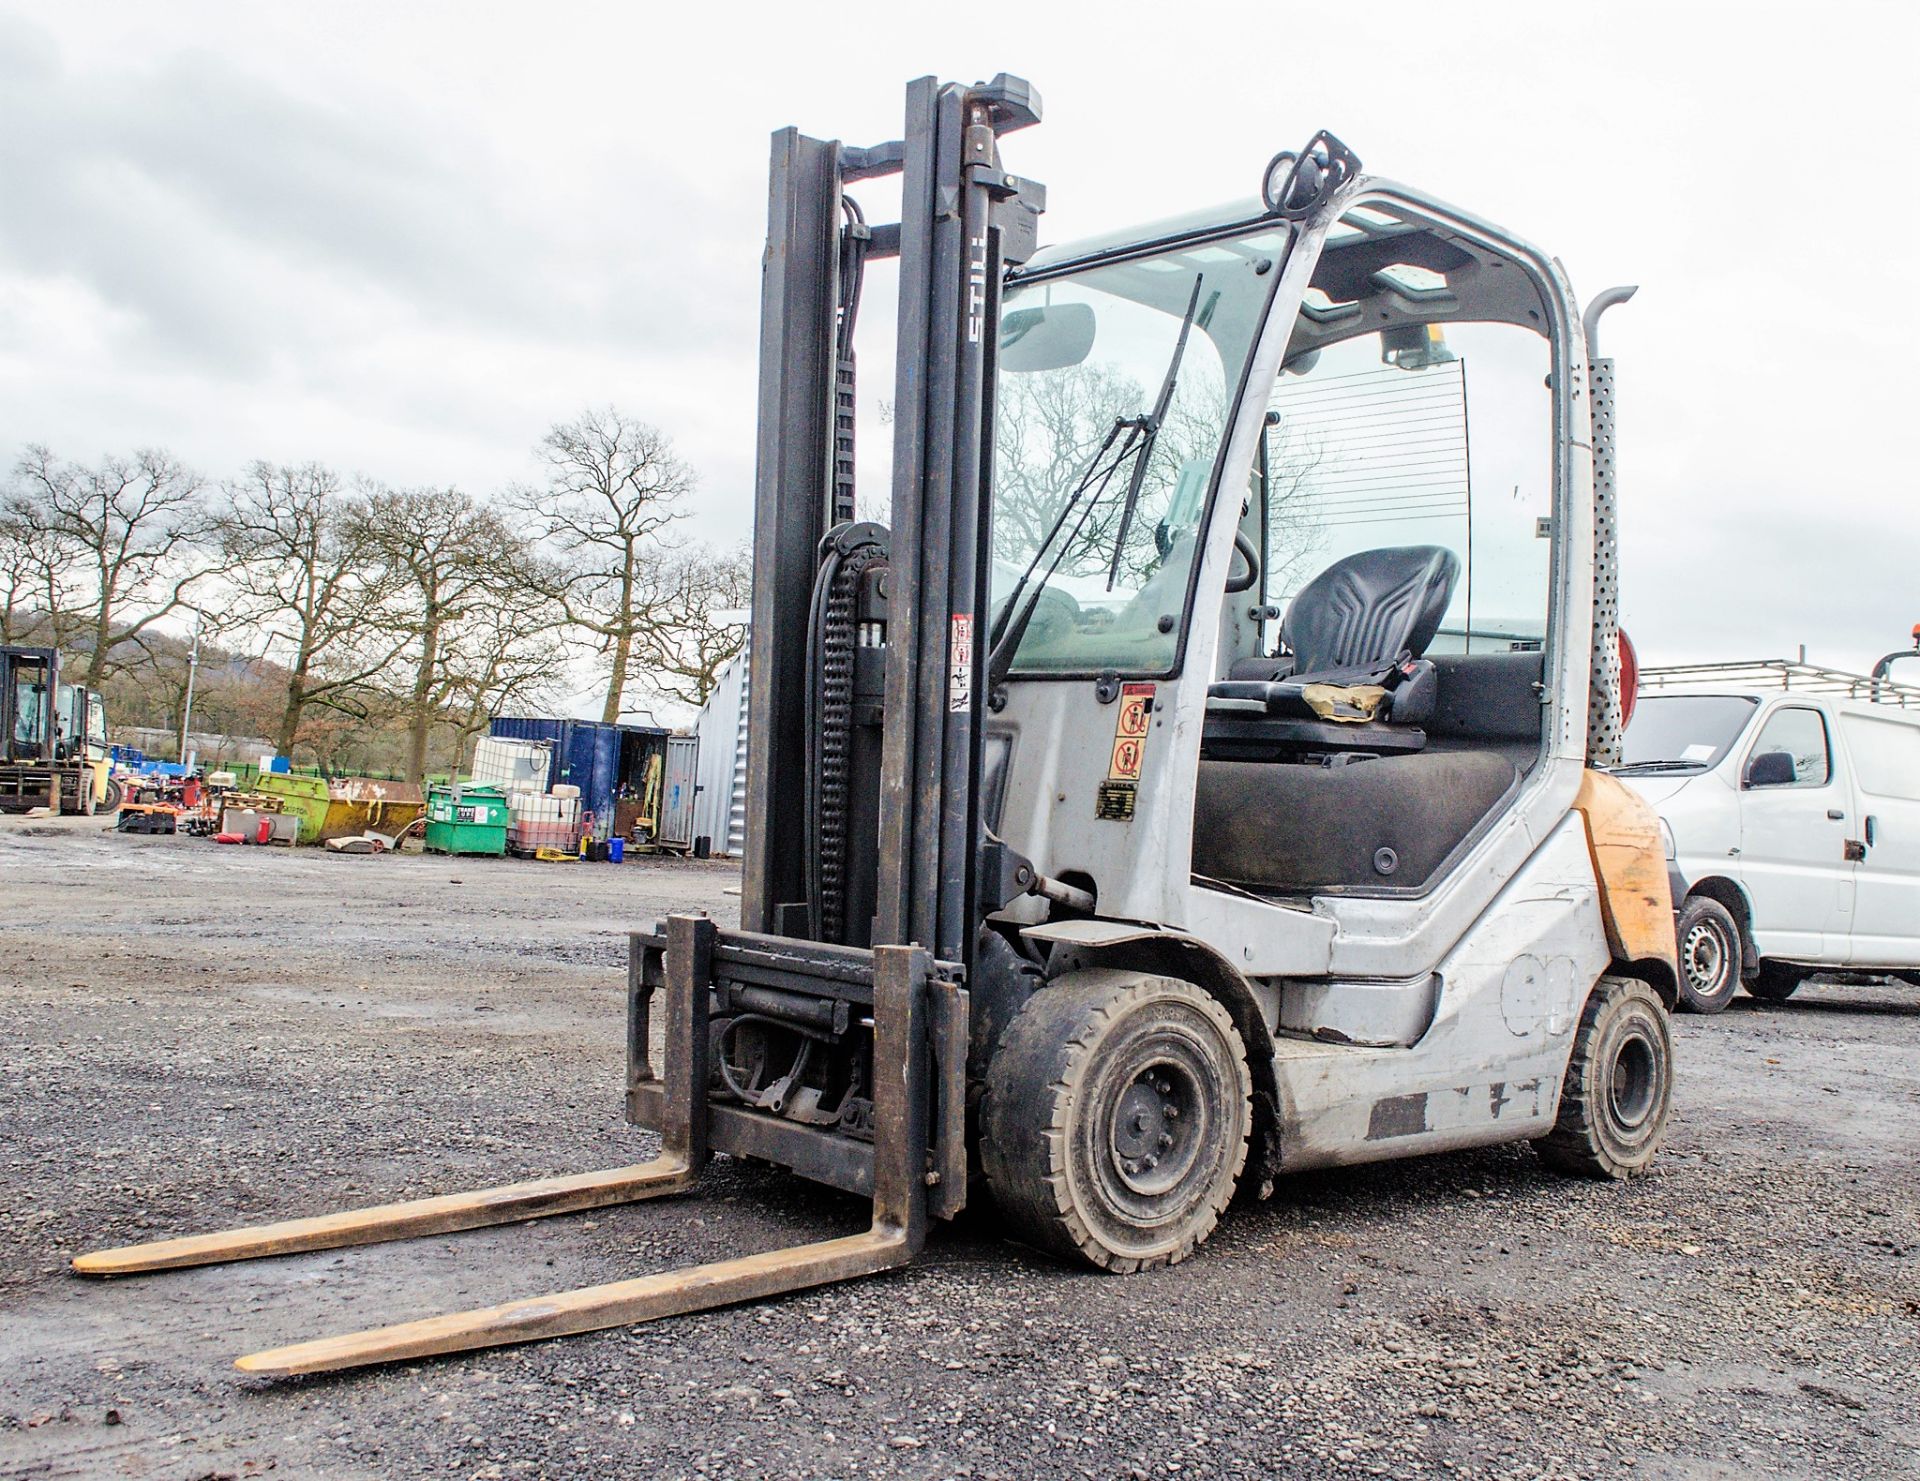 Still RX60-25 2.5 tonne gas powered fork lift truck Year: 2010 S/N: A00030 Recorded Hours: 10648